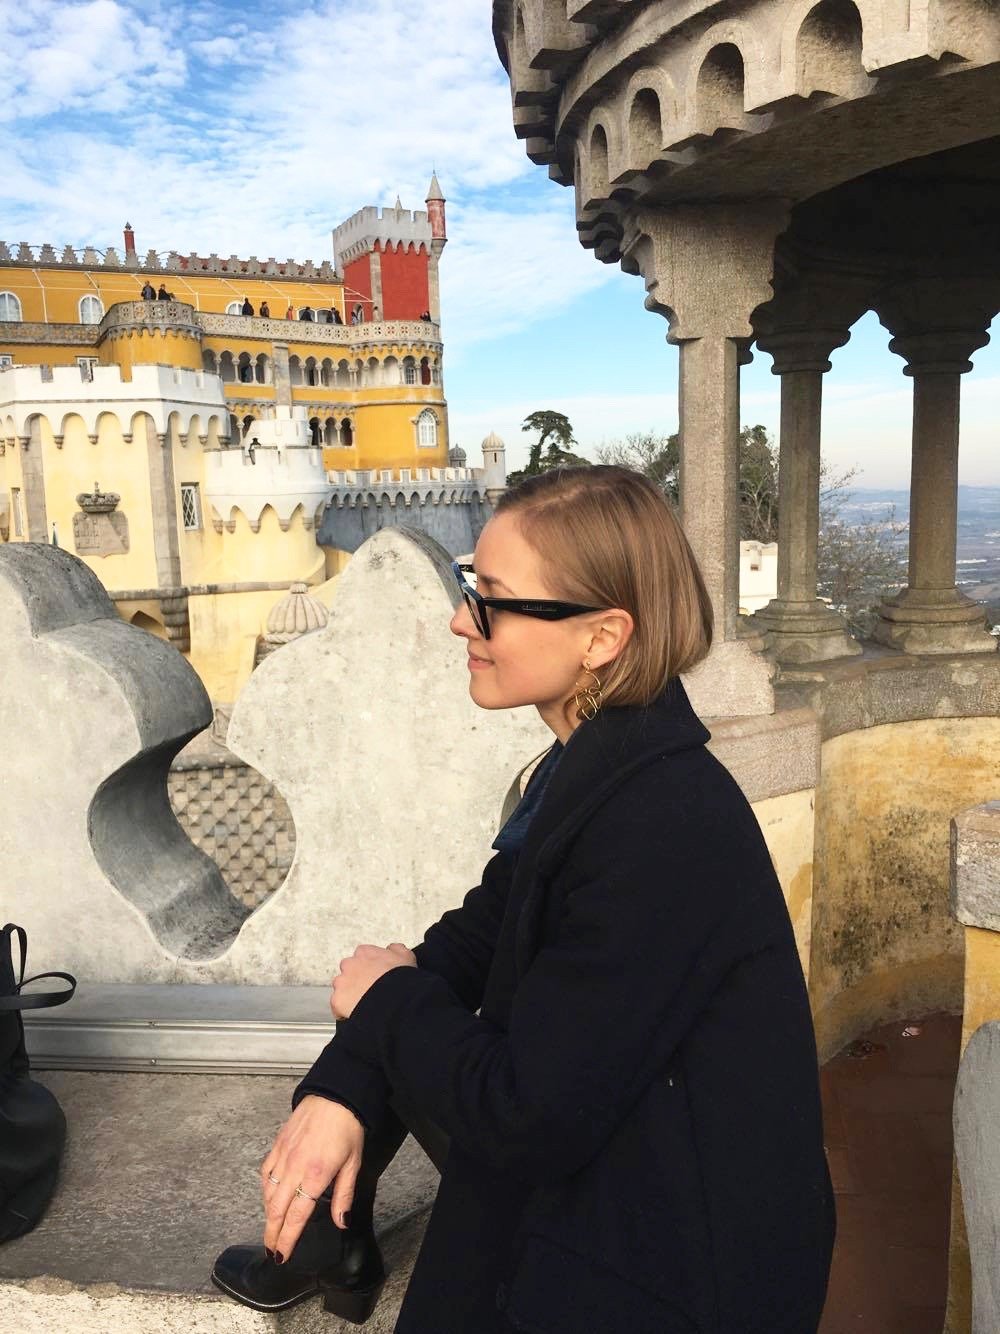 Fairytale in Portugal - Pena Palace and Moors Castle